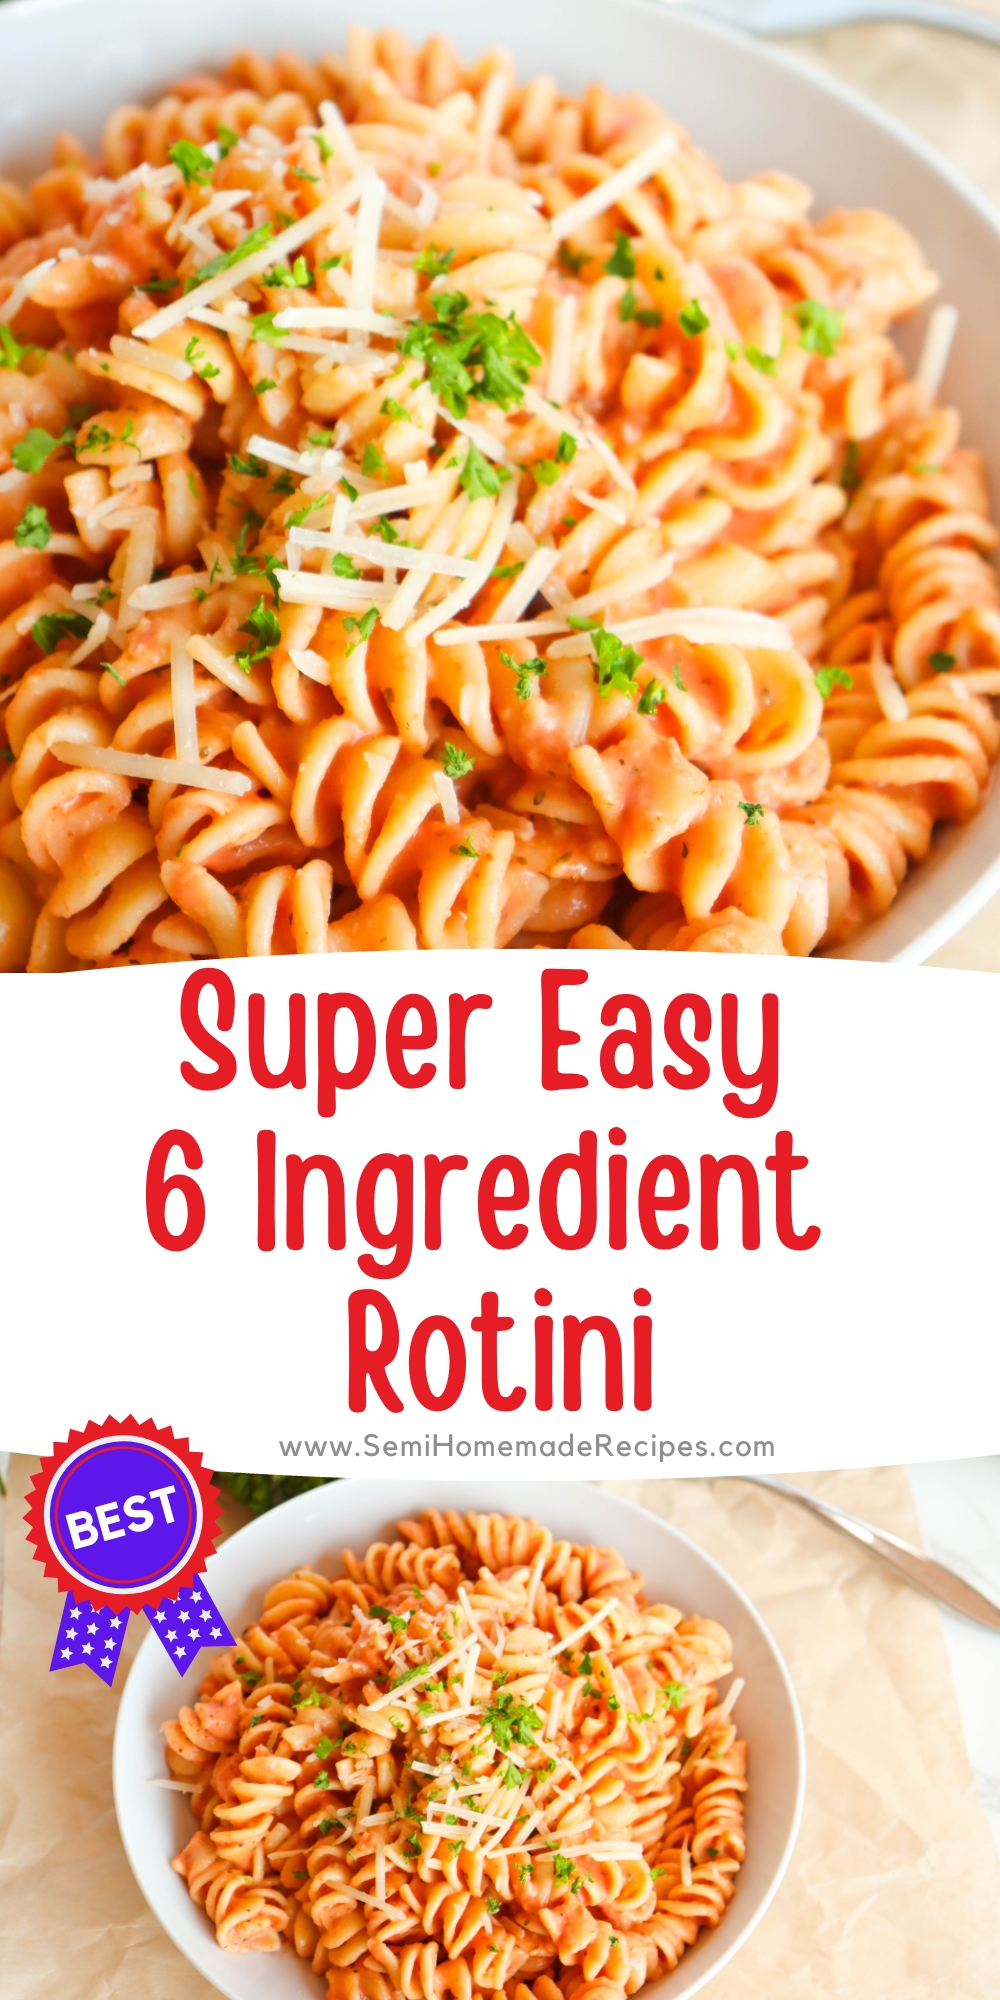 6 Ingredient Rotini - In just a few simple steps and with only 6 ingredients, you can create a delicious rotini dish that will wow your taste buds. Whether you're cooking for yourself, your family, or hosting a gathering, this recipe is a winner. Don't waste time on complex recipes when you can have a satisfying meal on the table in no time. 